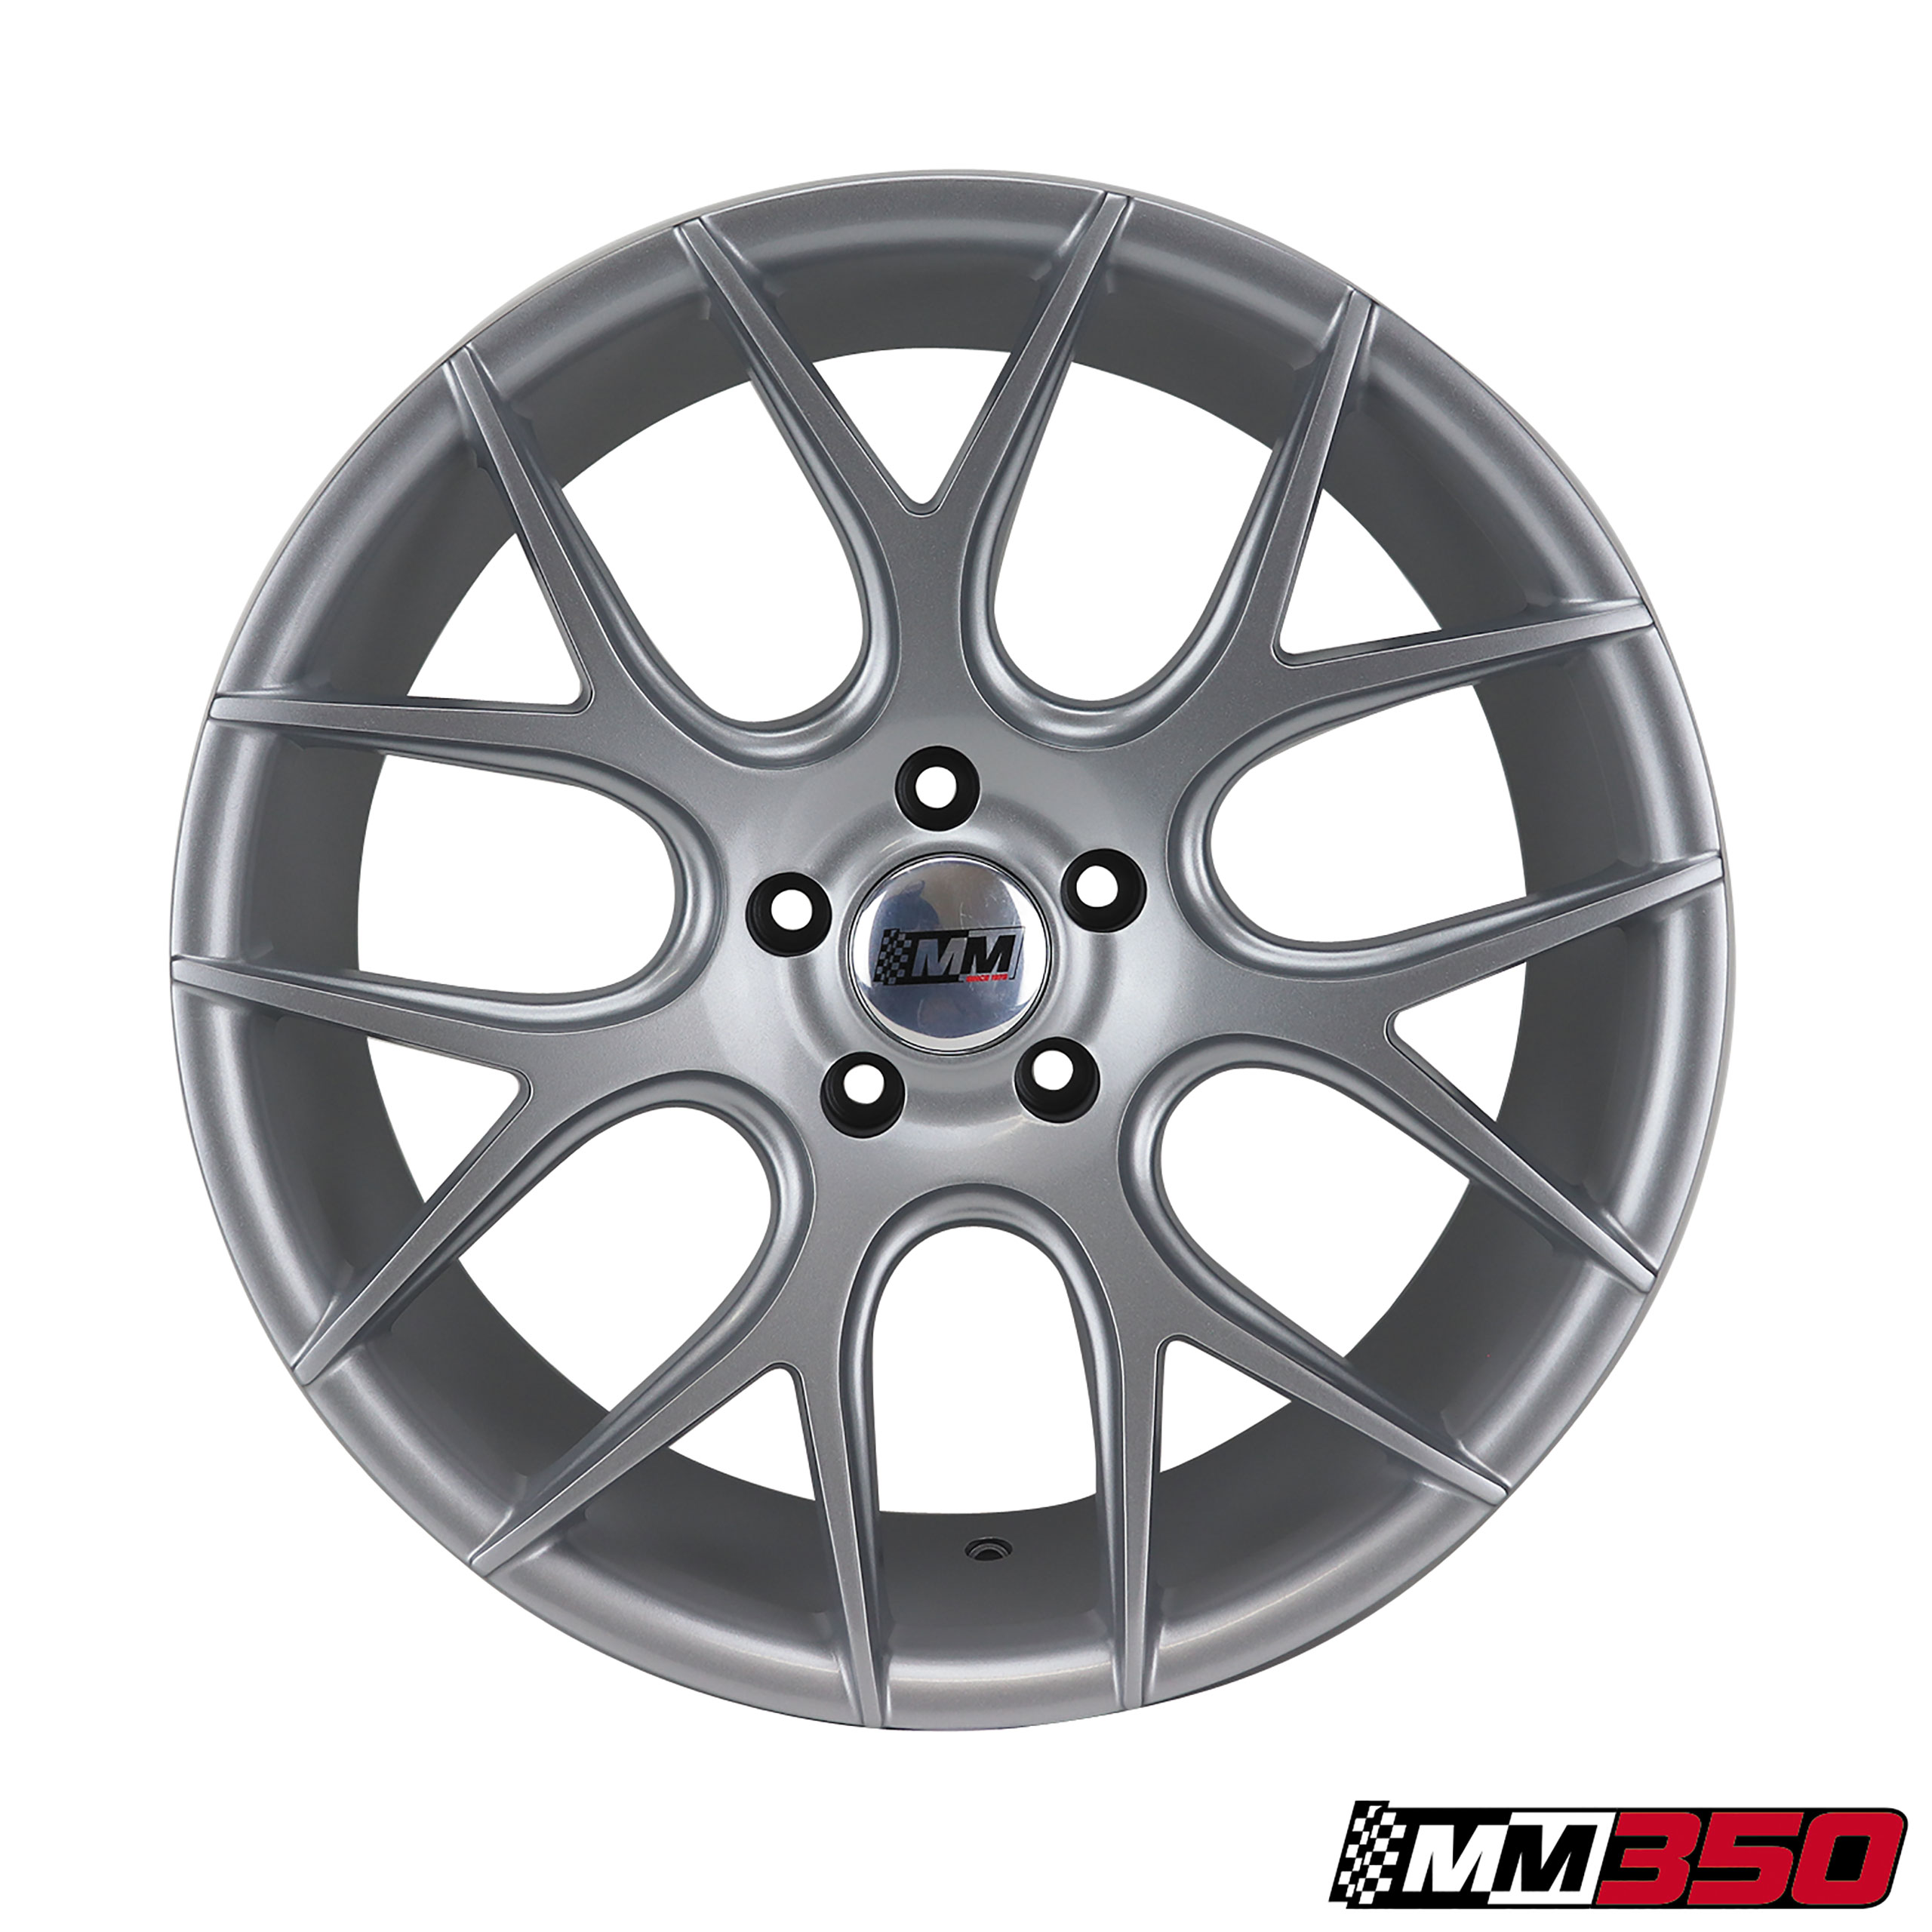 2005-2014 Ford Mustang C6-C7 MM350 19x8-5 Wheel - Silver CA-MA12382 